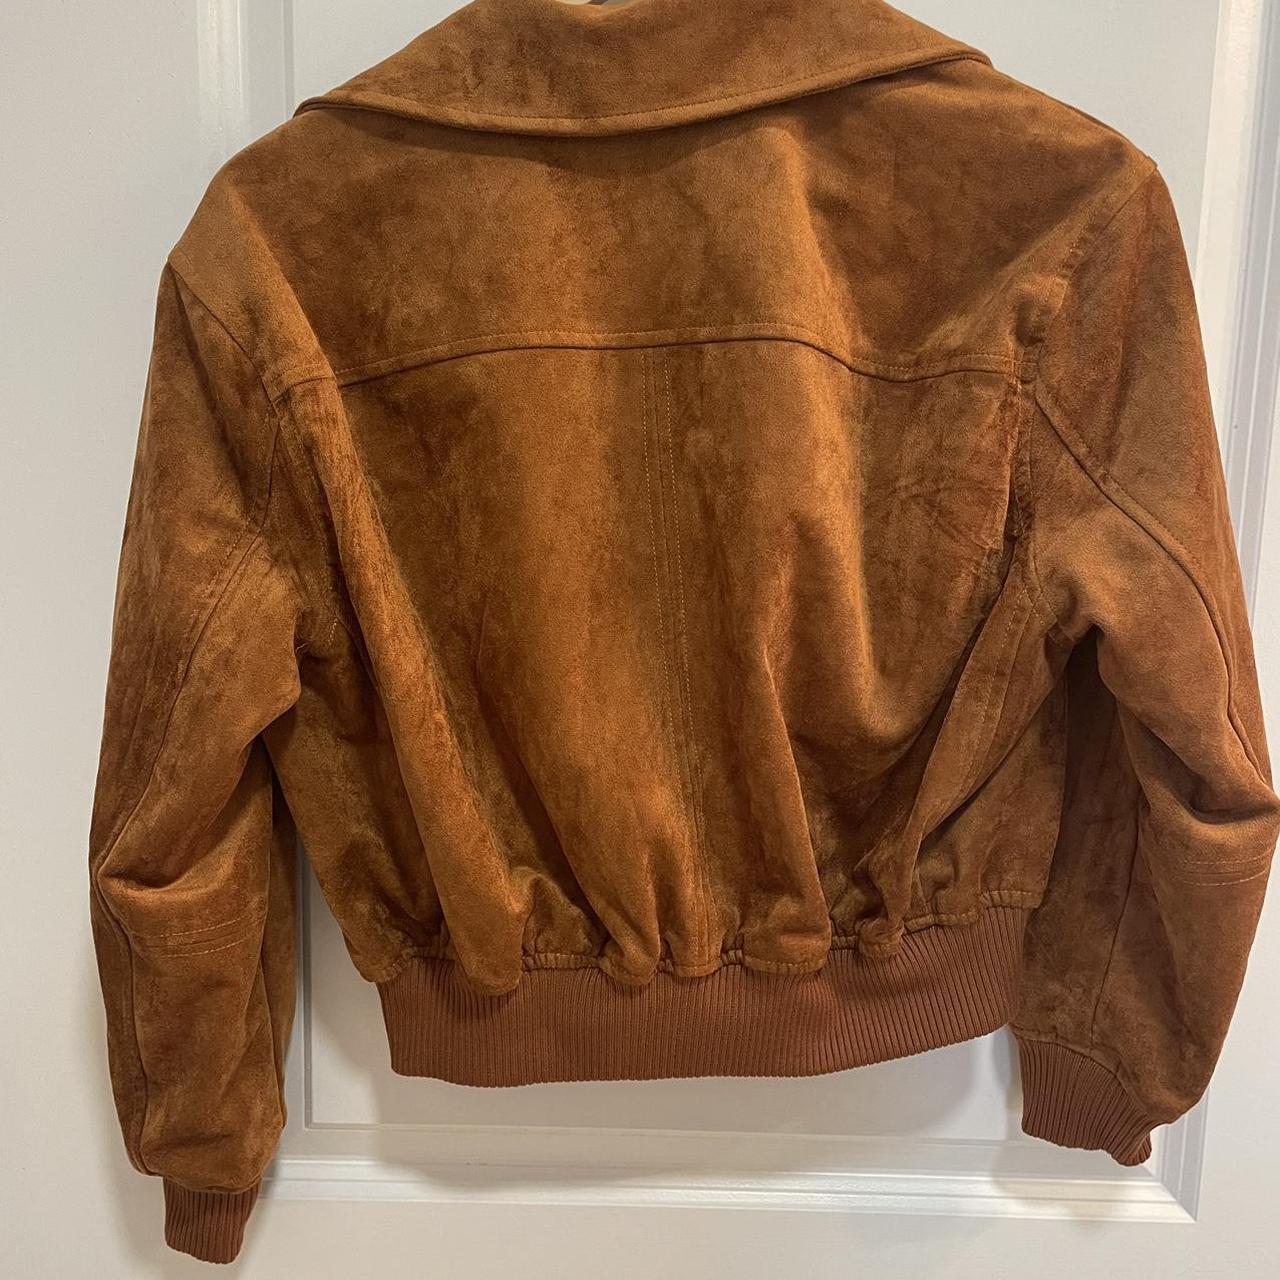 Blank NYC Women's Tan and Brown Jacket (7)